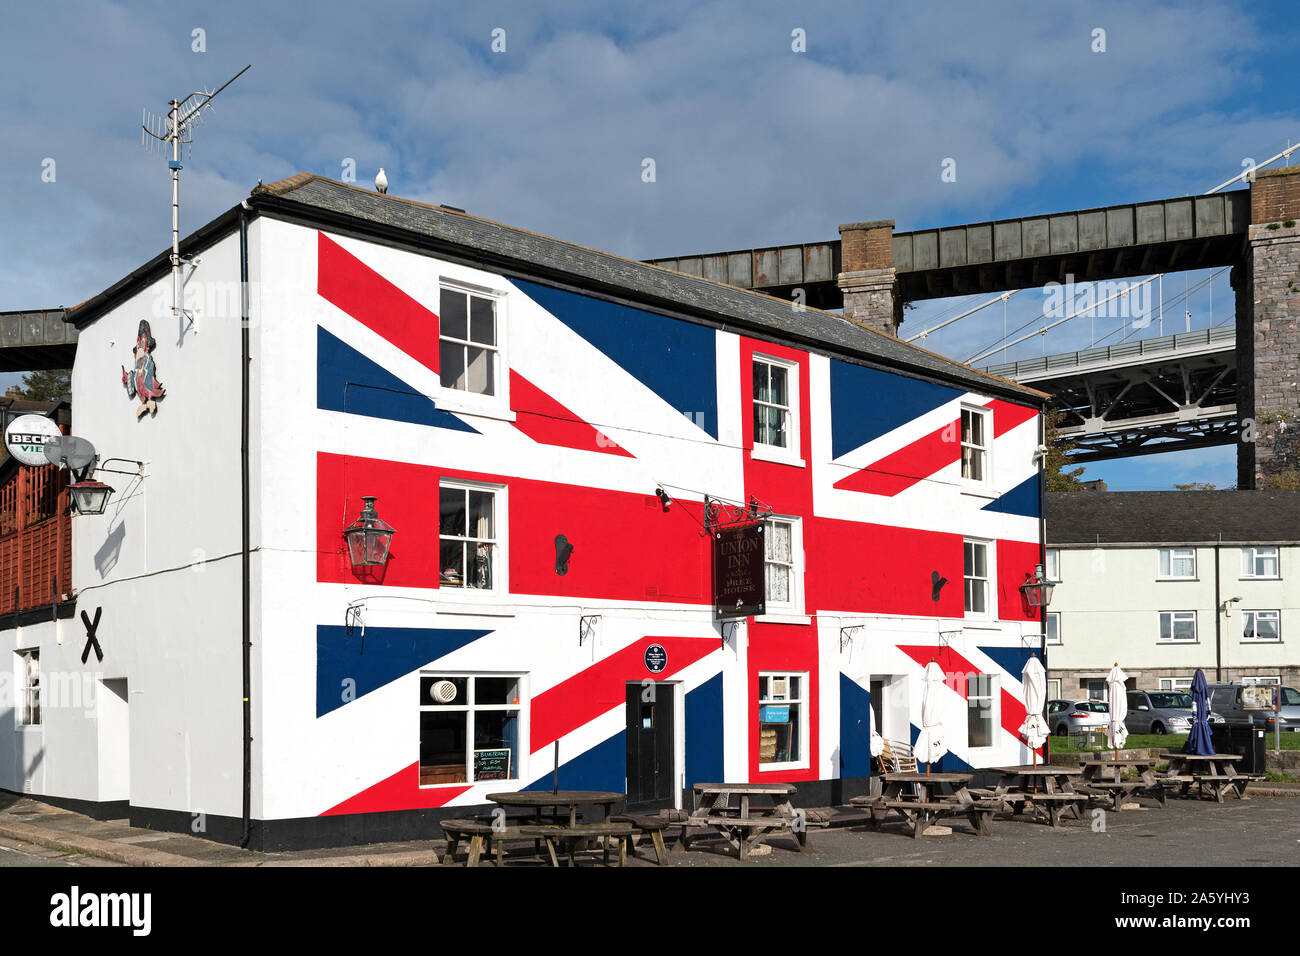 the union pub in saltash, cornwall, england, britain, painted in the style of the union jack flag Stock Photo